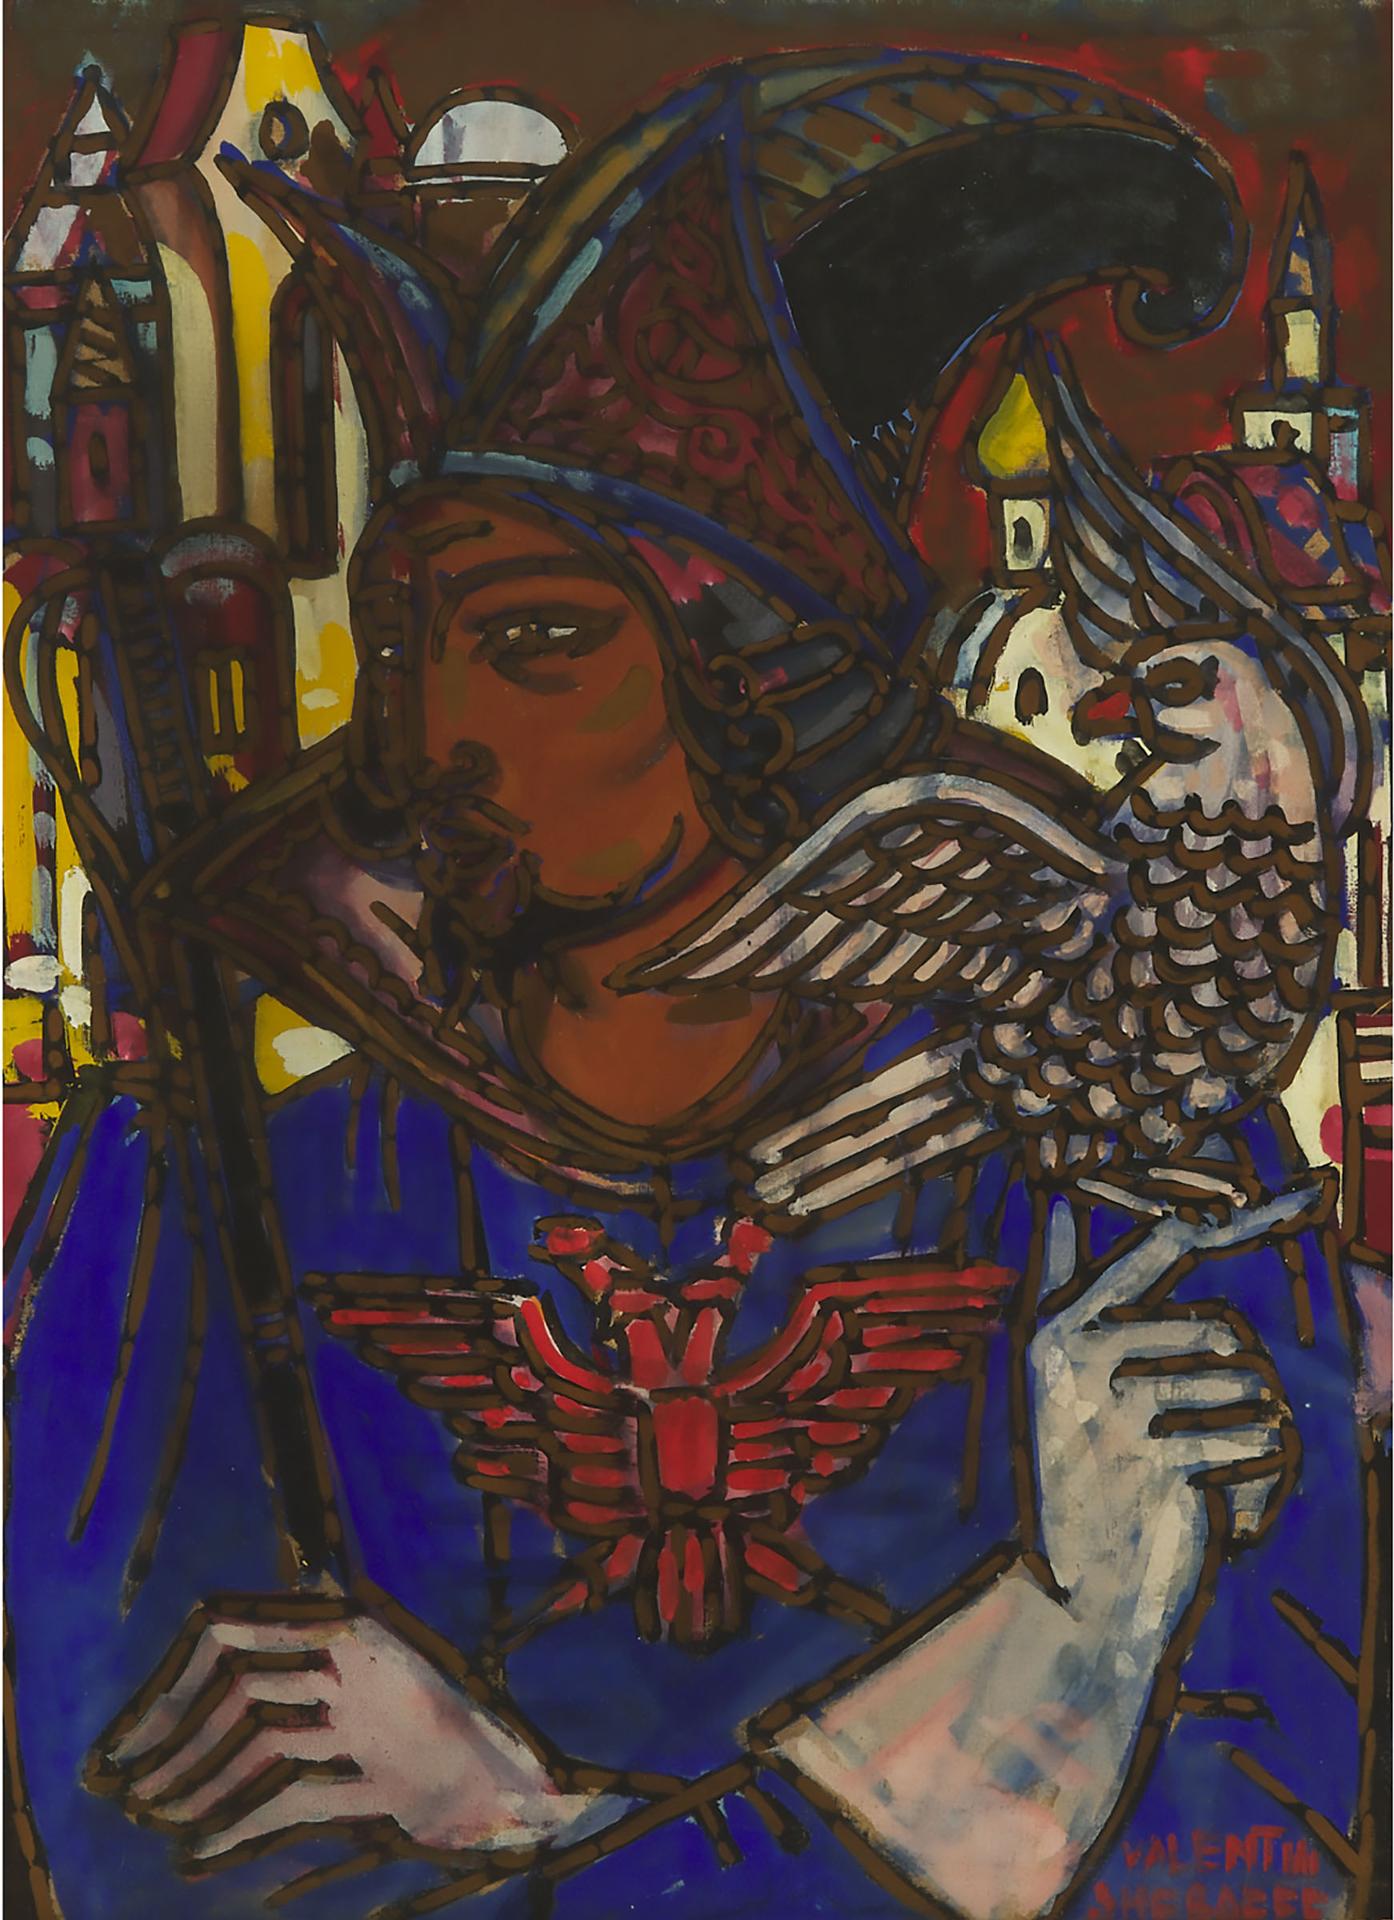 Valentin Firsov Shabaeff (1891-1978) - Man With Eagle In Imperial Coat Of Arms Wearing A Headdress And Holding A Sceptre